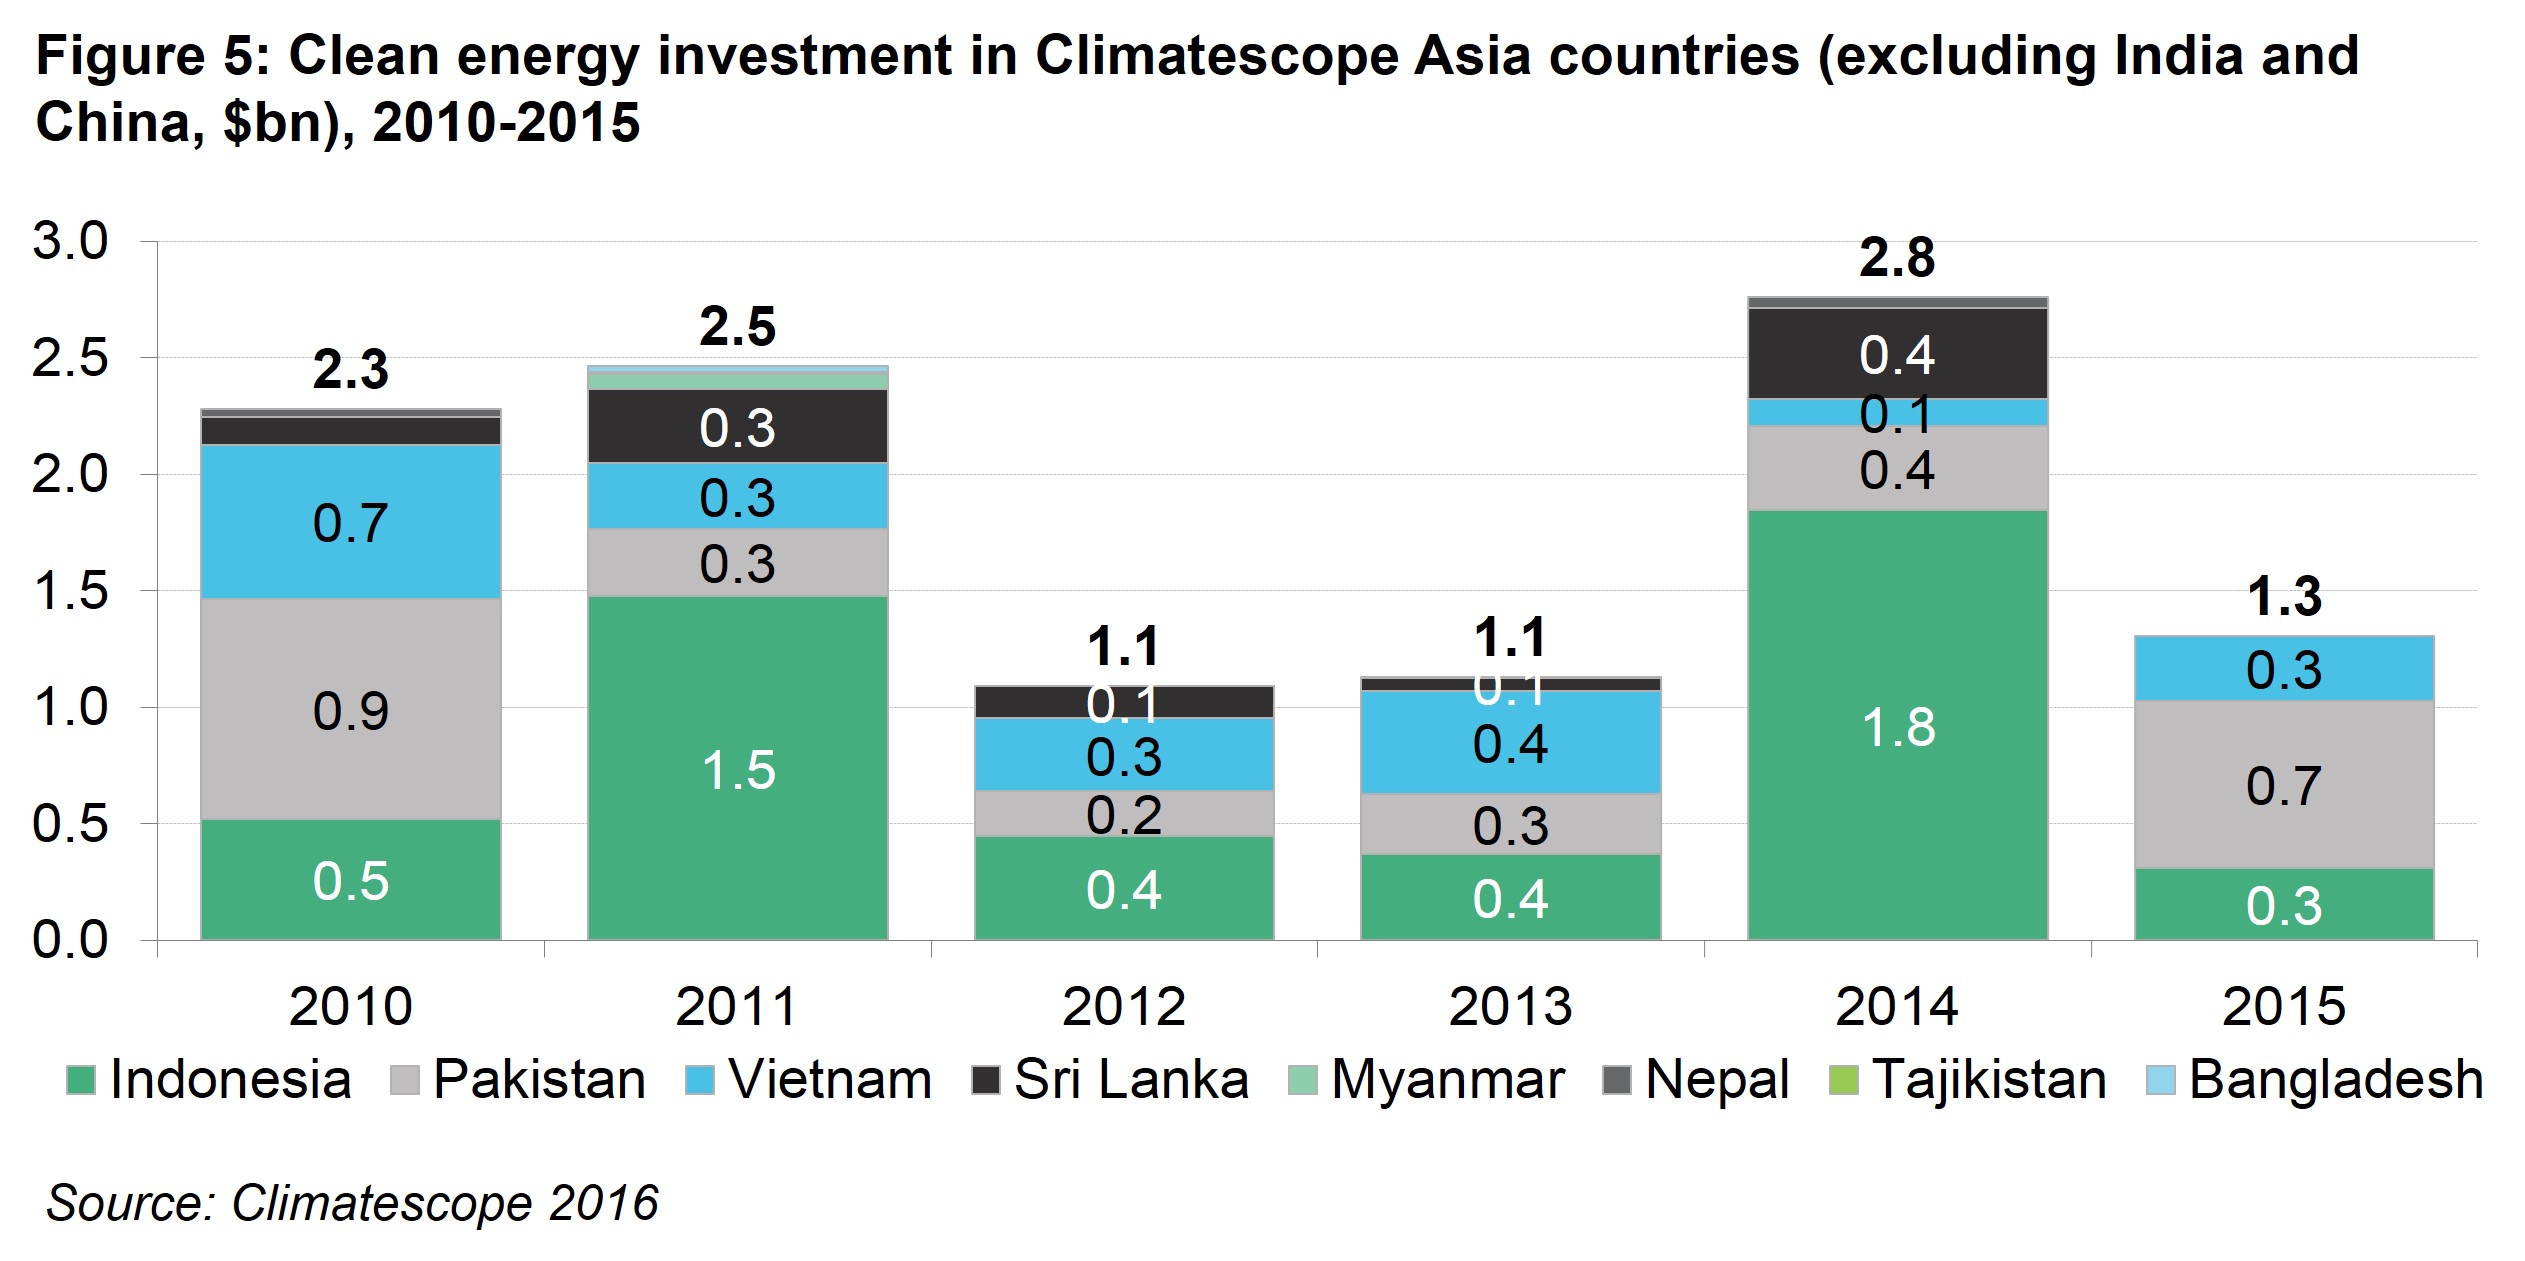 Asia Fig 5 - Clean energy investment in Climatescope Asia countries (excluding India and China, $bn), 2010-2015